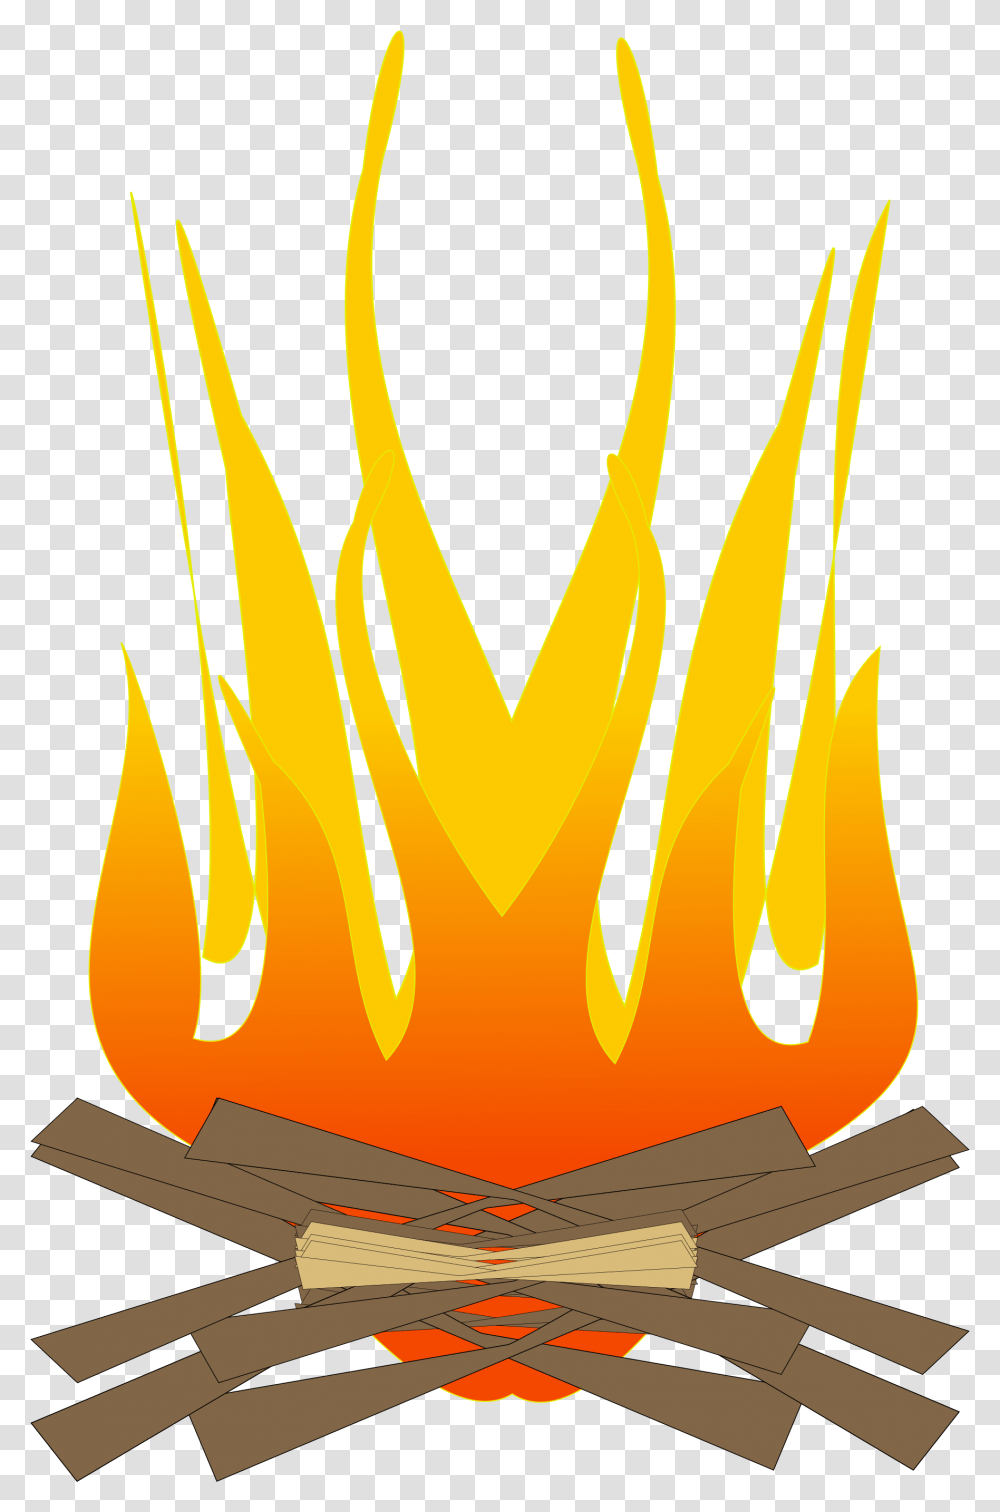 Firefighters Pour Water Reversible And Irreversible Changes Clipart, Flame, Bonfire Transparent Png